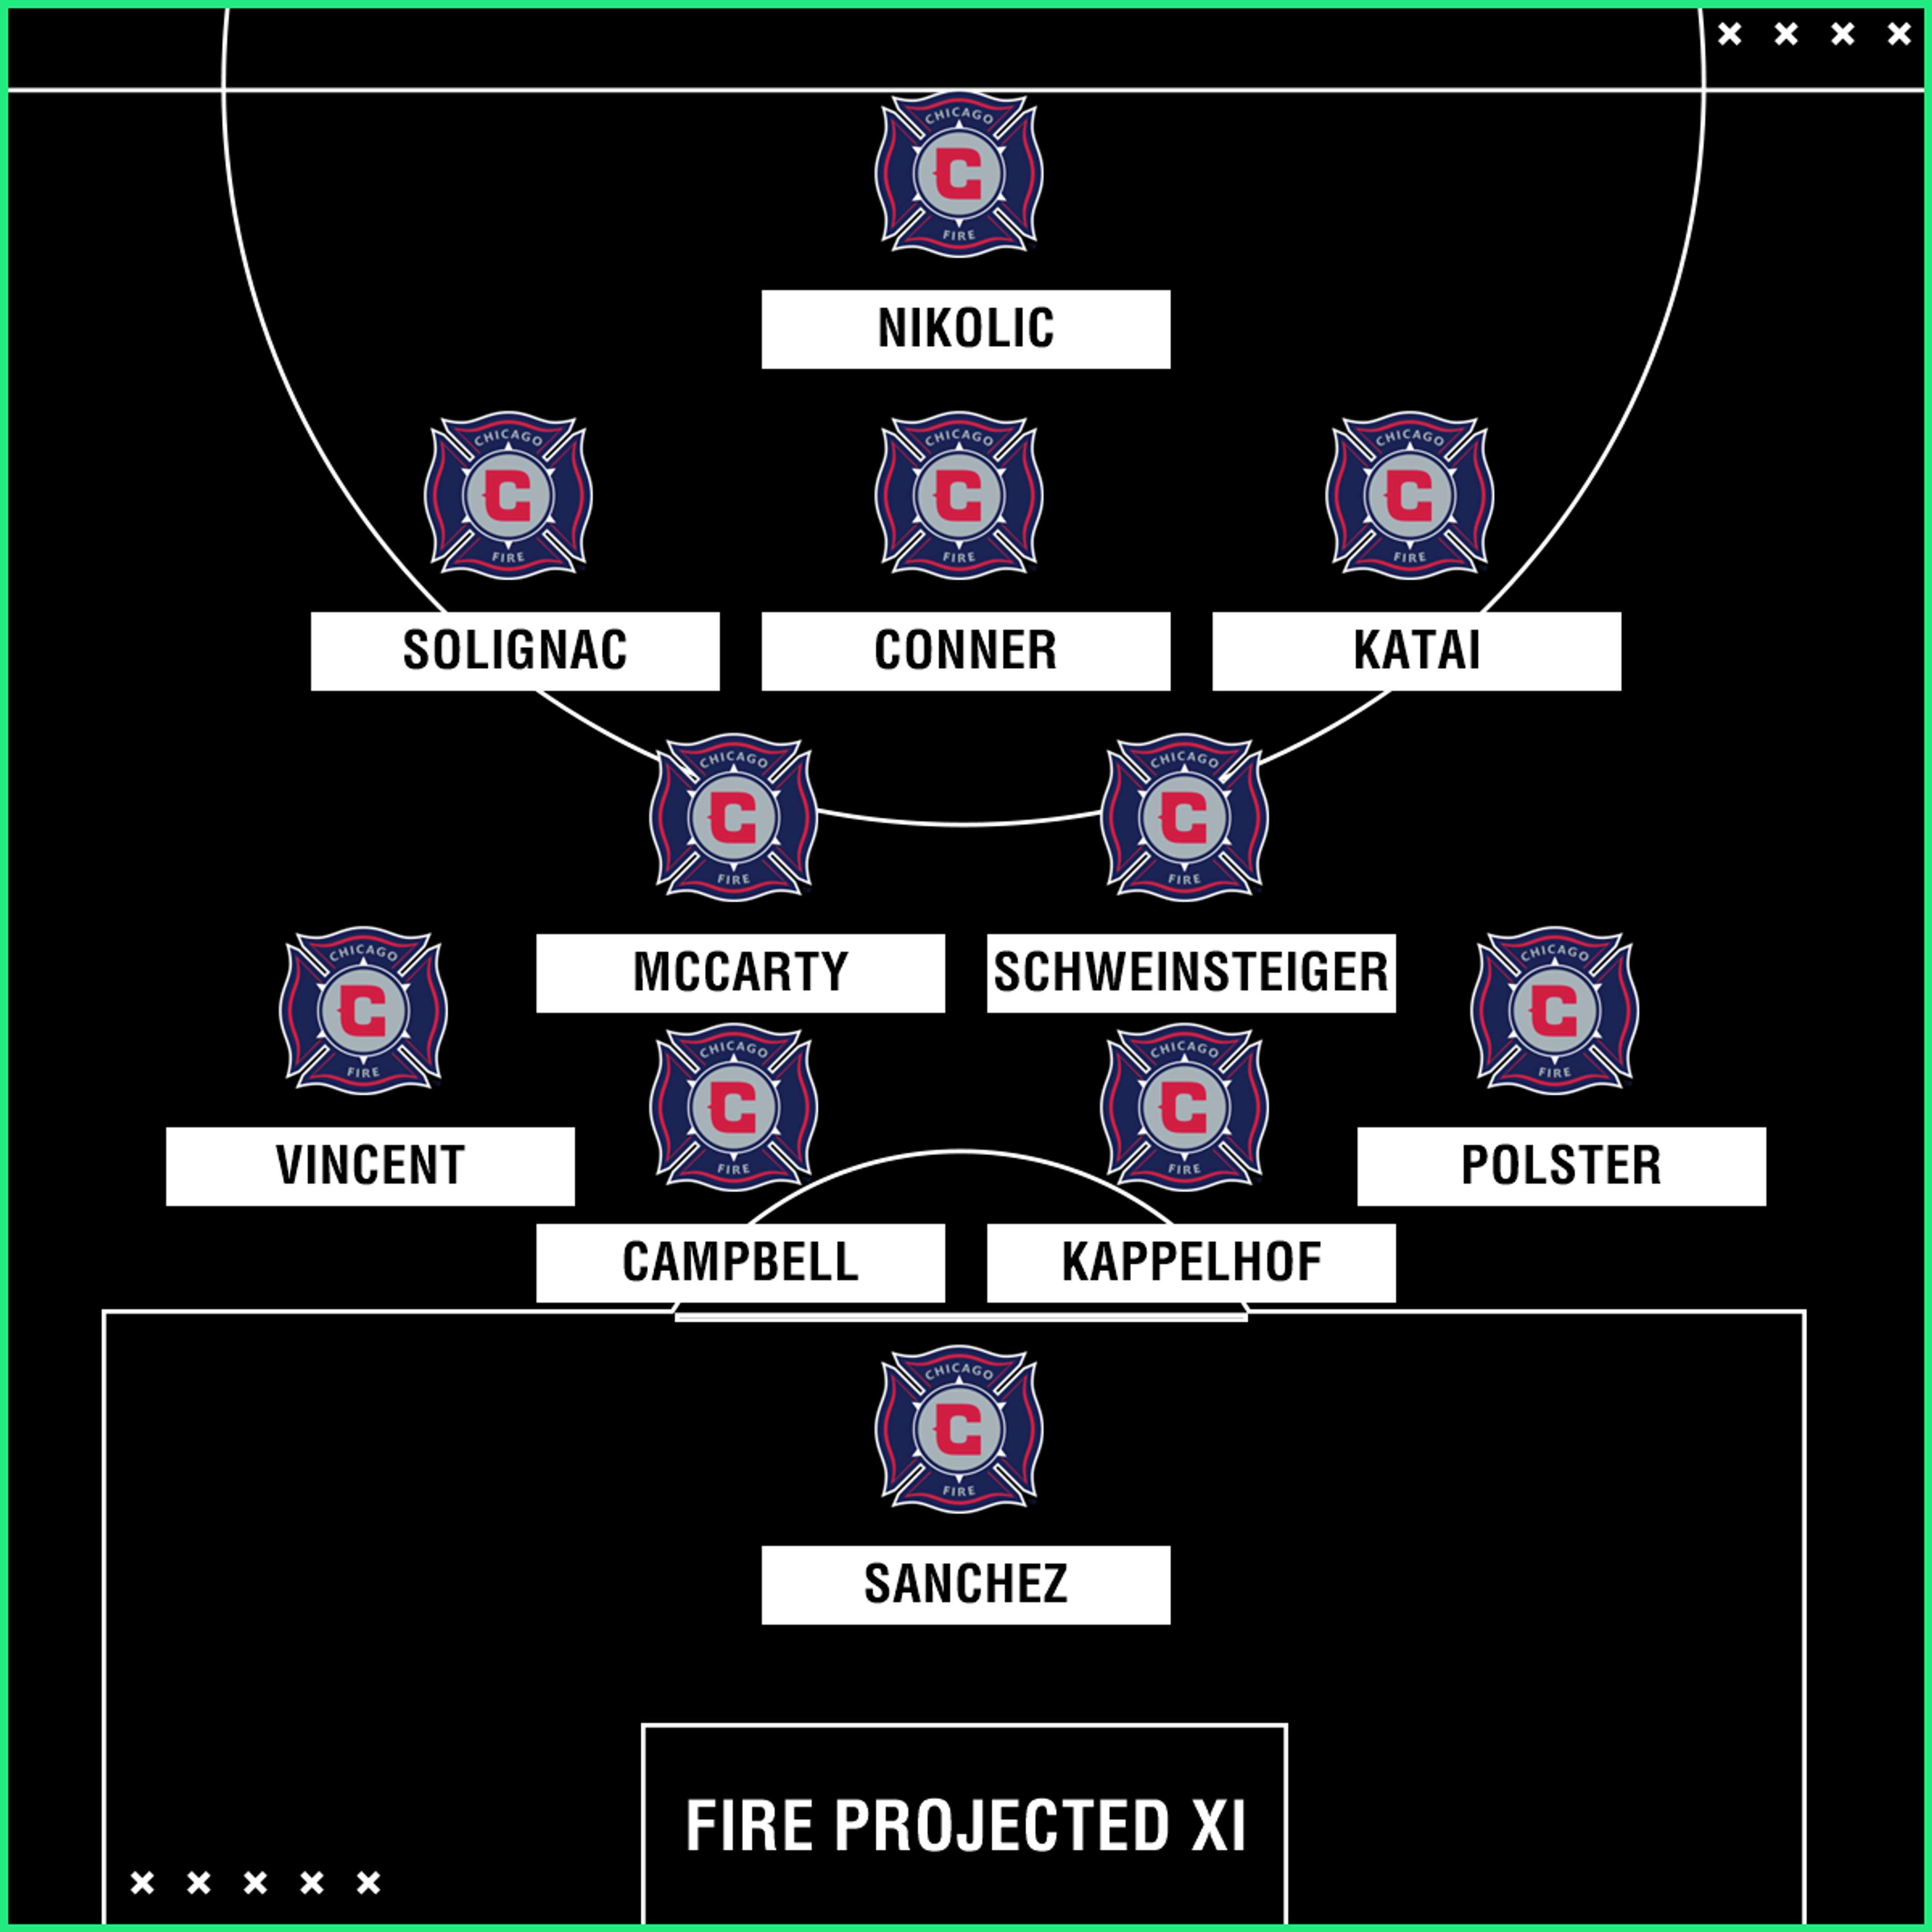 Chicago Fire projected XI